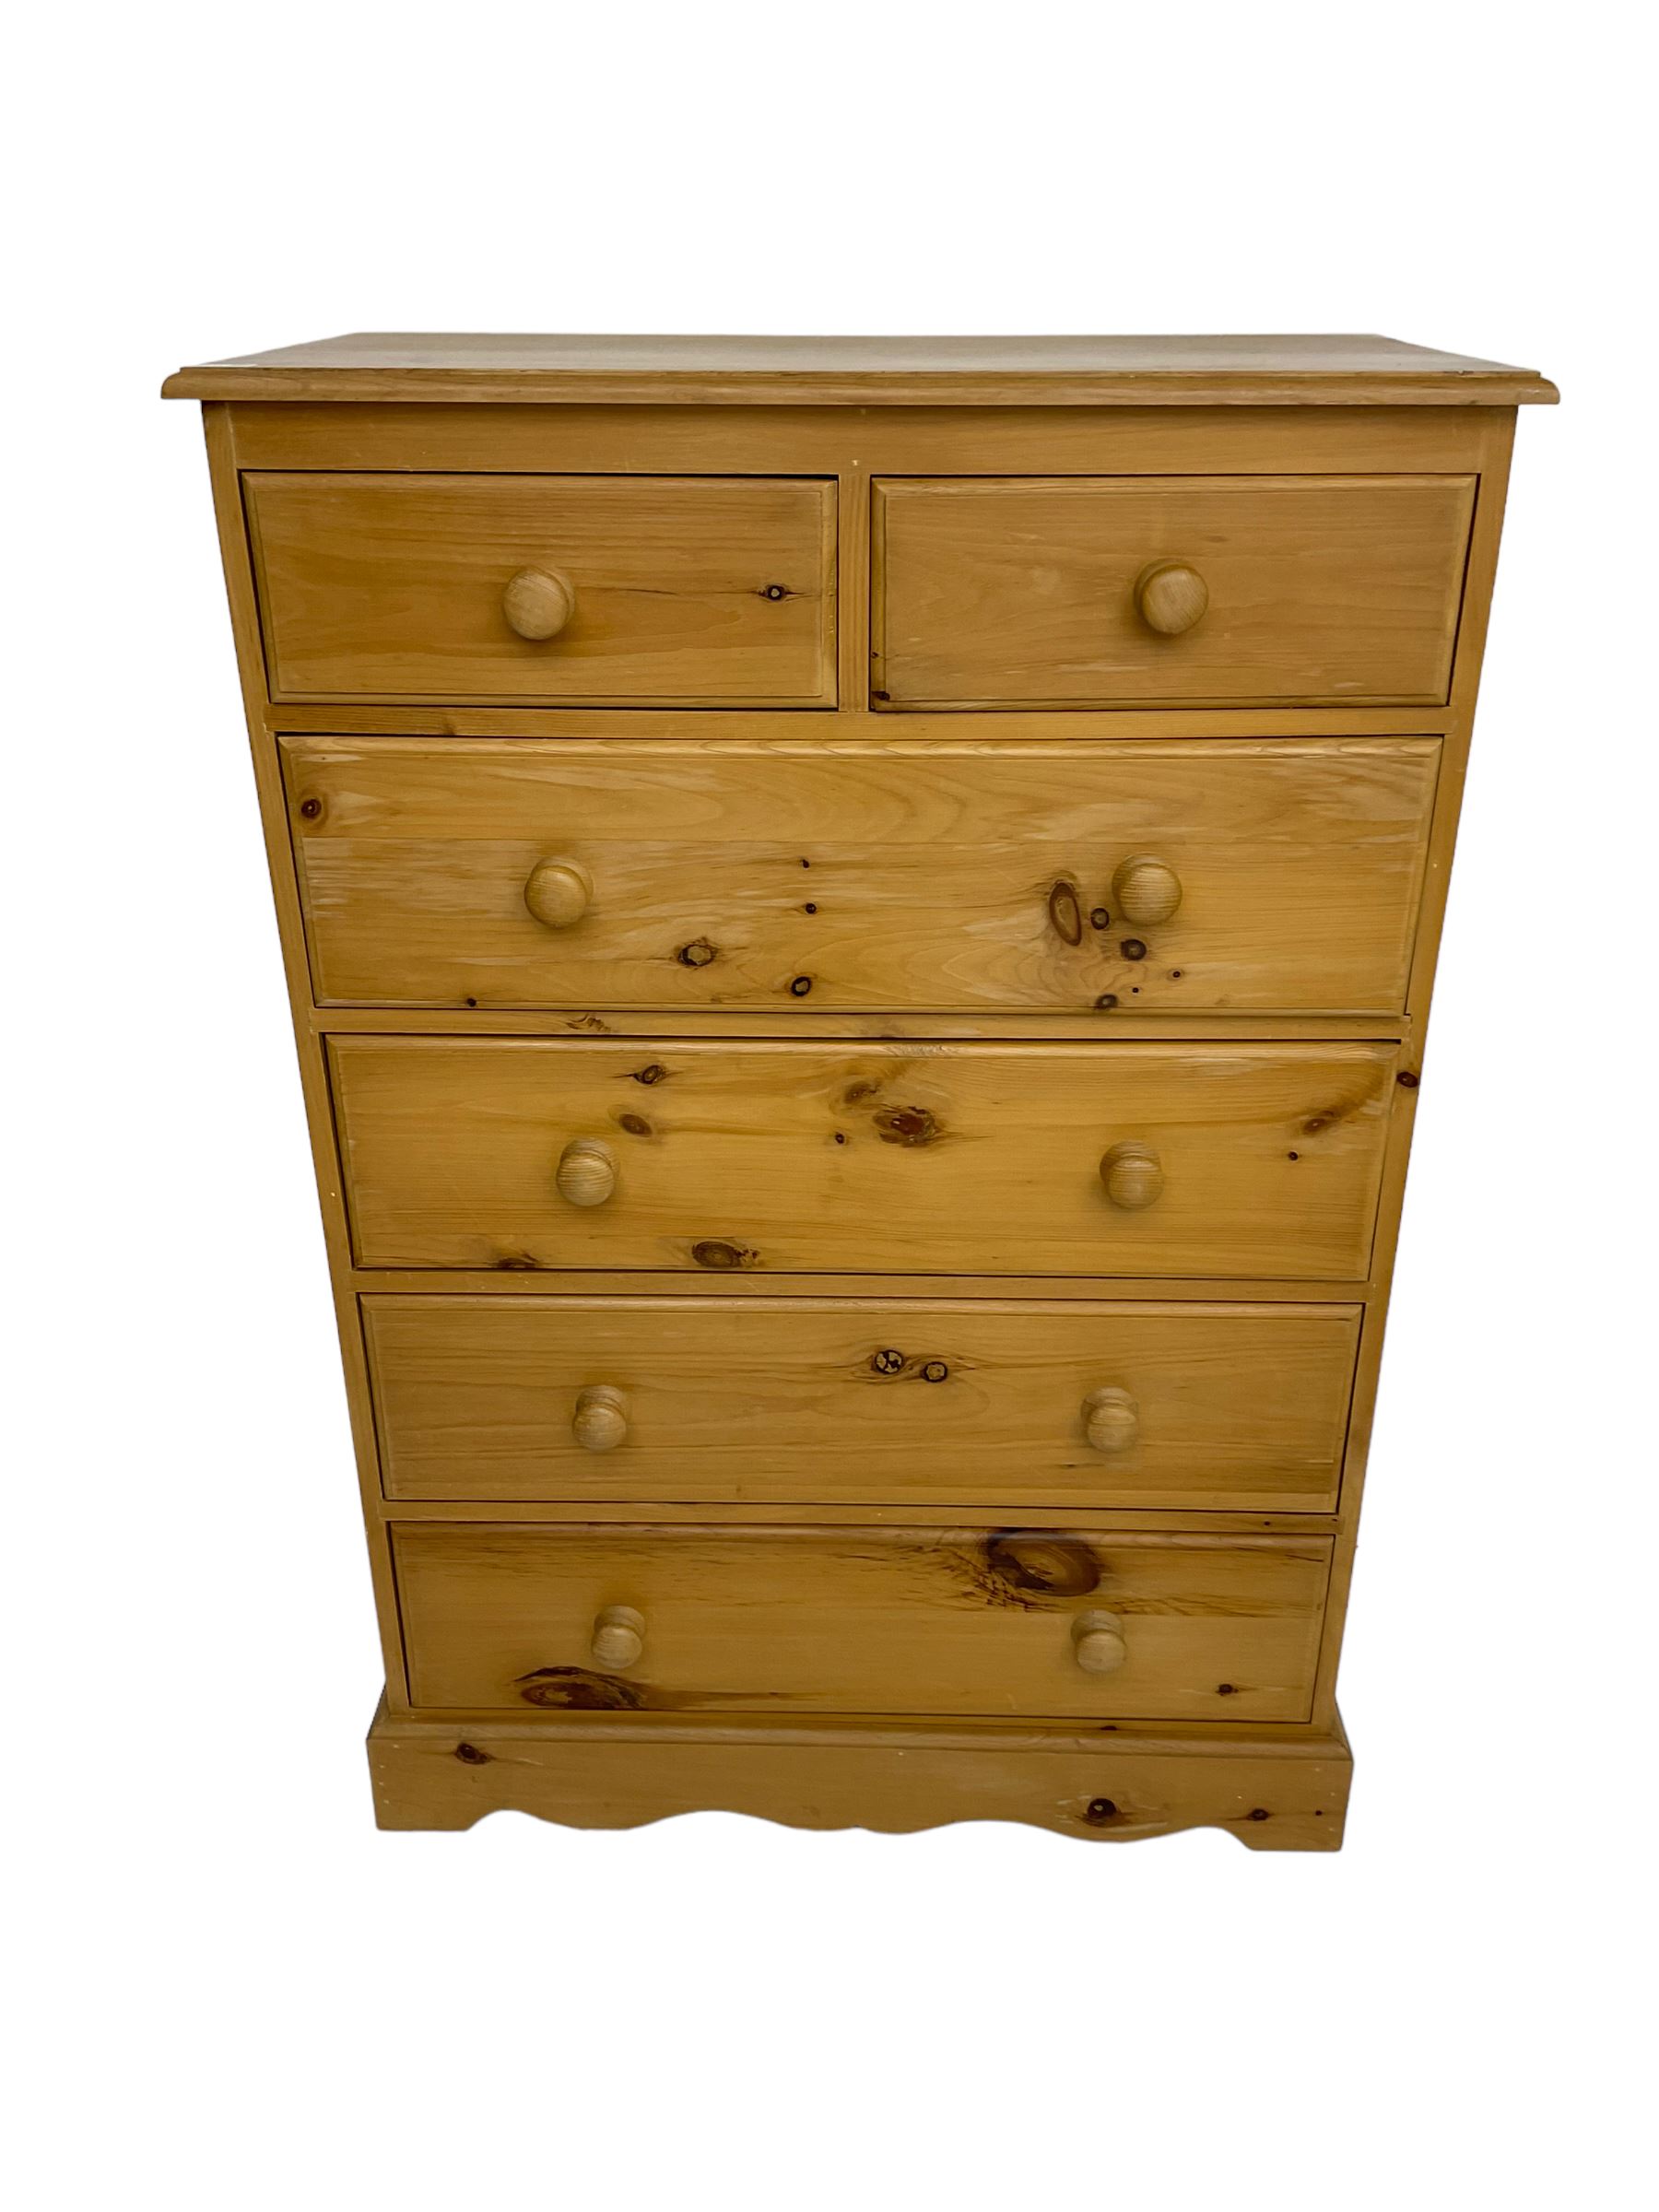 Traditional pine chest - Image 7 of 7